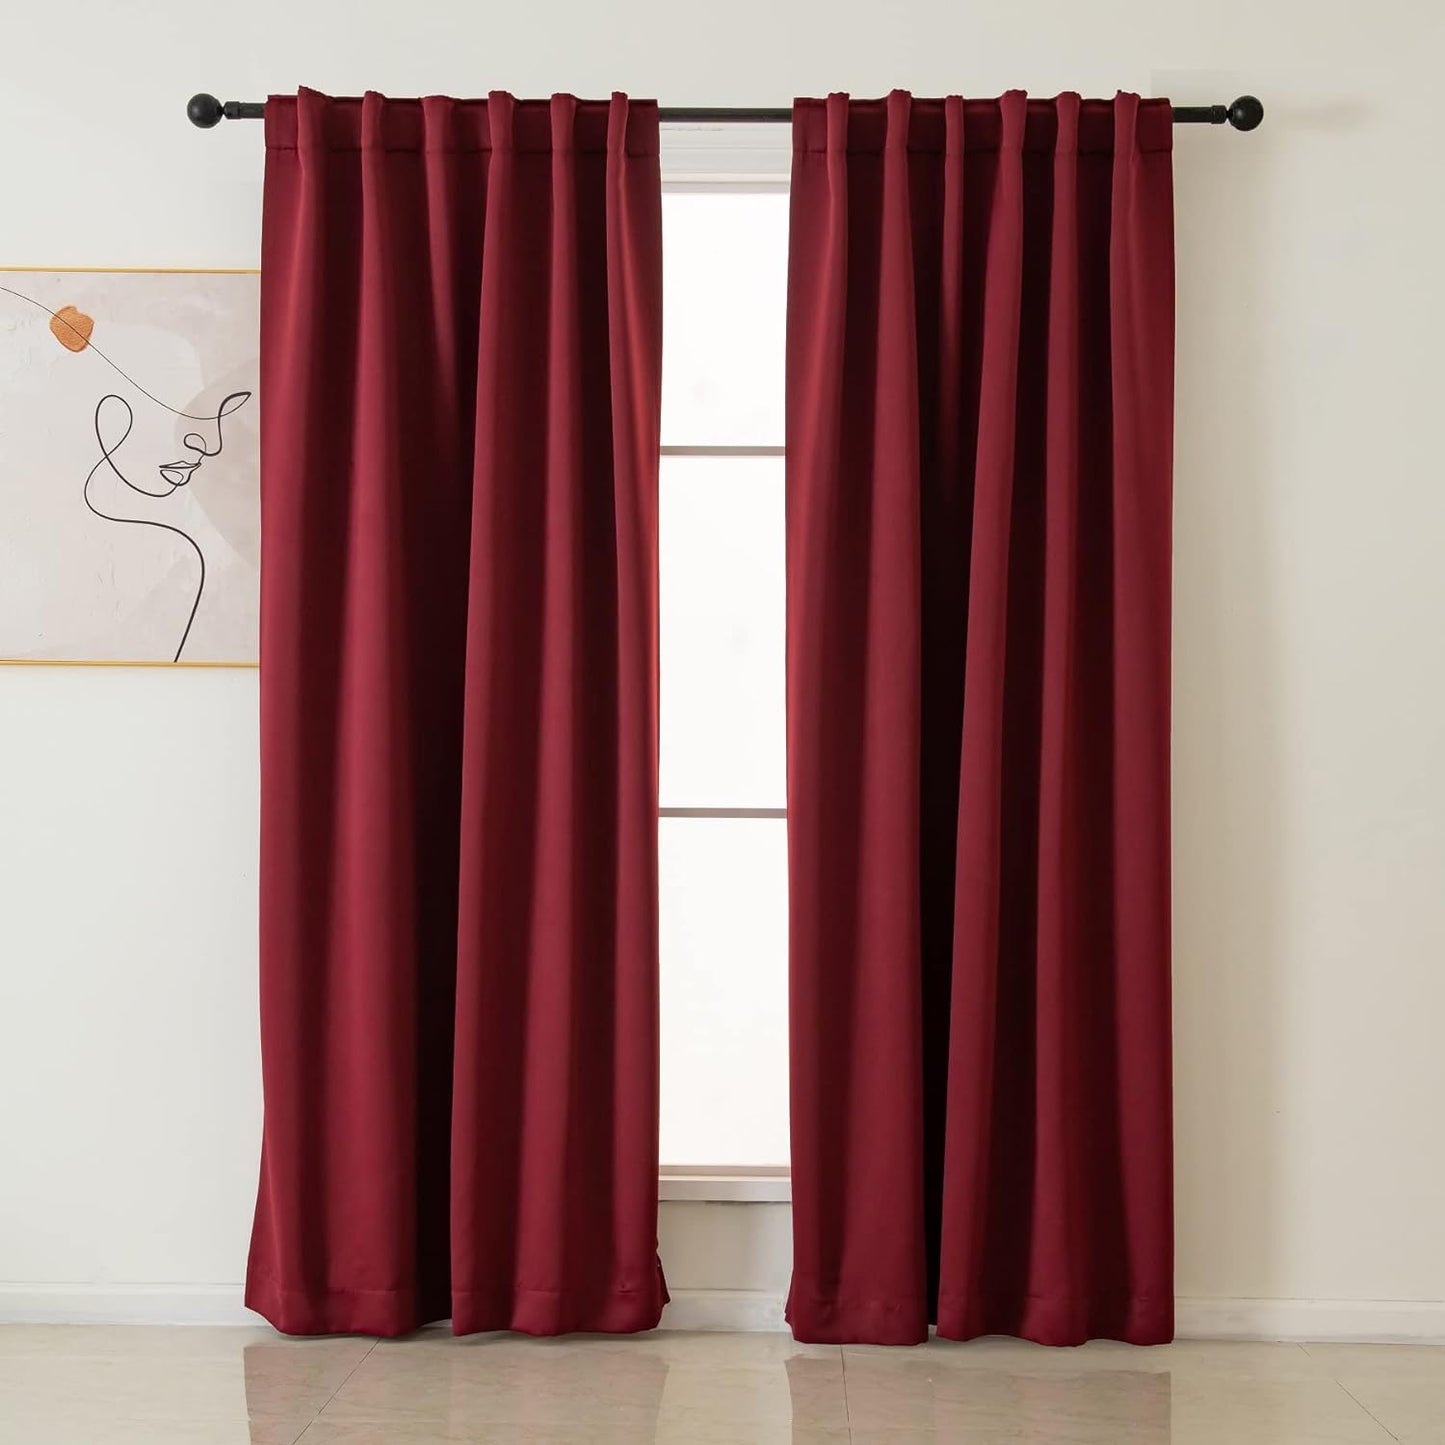 Pickluc Blackout Curtains 96 Inches Long 2 Panels, Black Out Drapes for Bedroom or Living Room, Back Tab and Rod Pocket Top, Set of Two, Dark Grey, 52" Wide and 96" Length.  Pickluc Burgundy Red 52"W X 96"L 